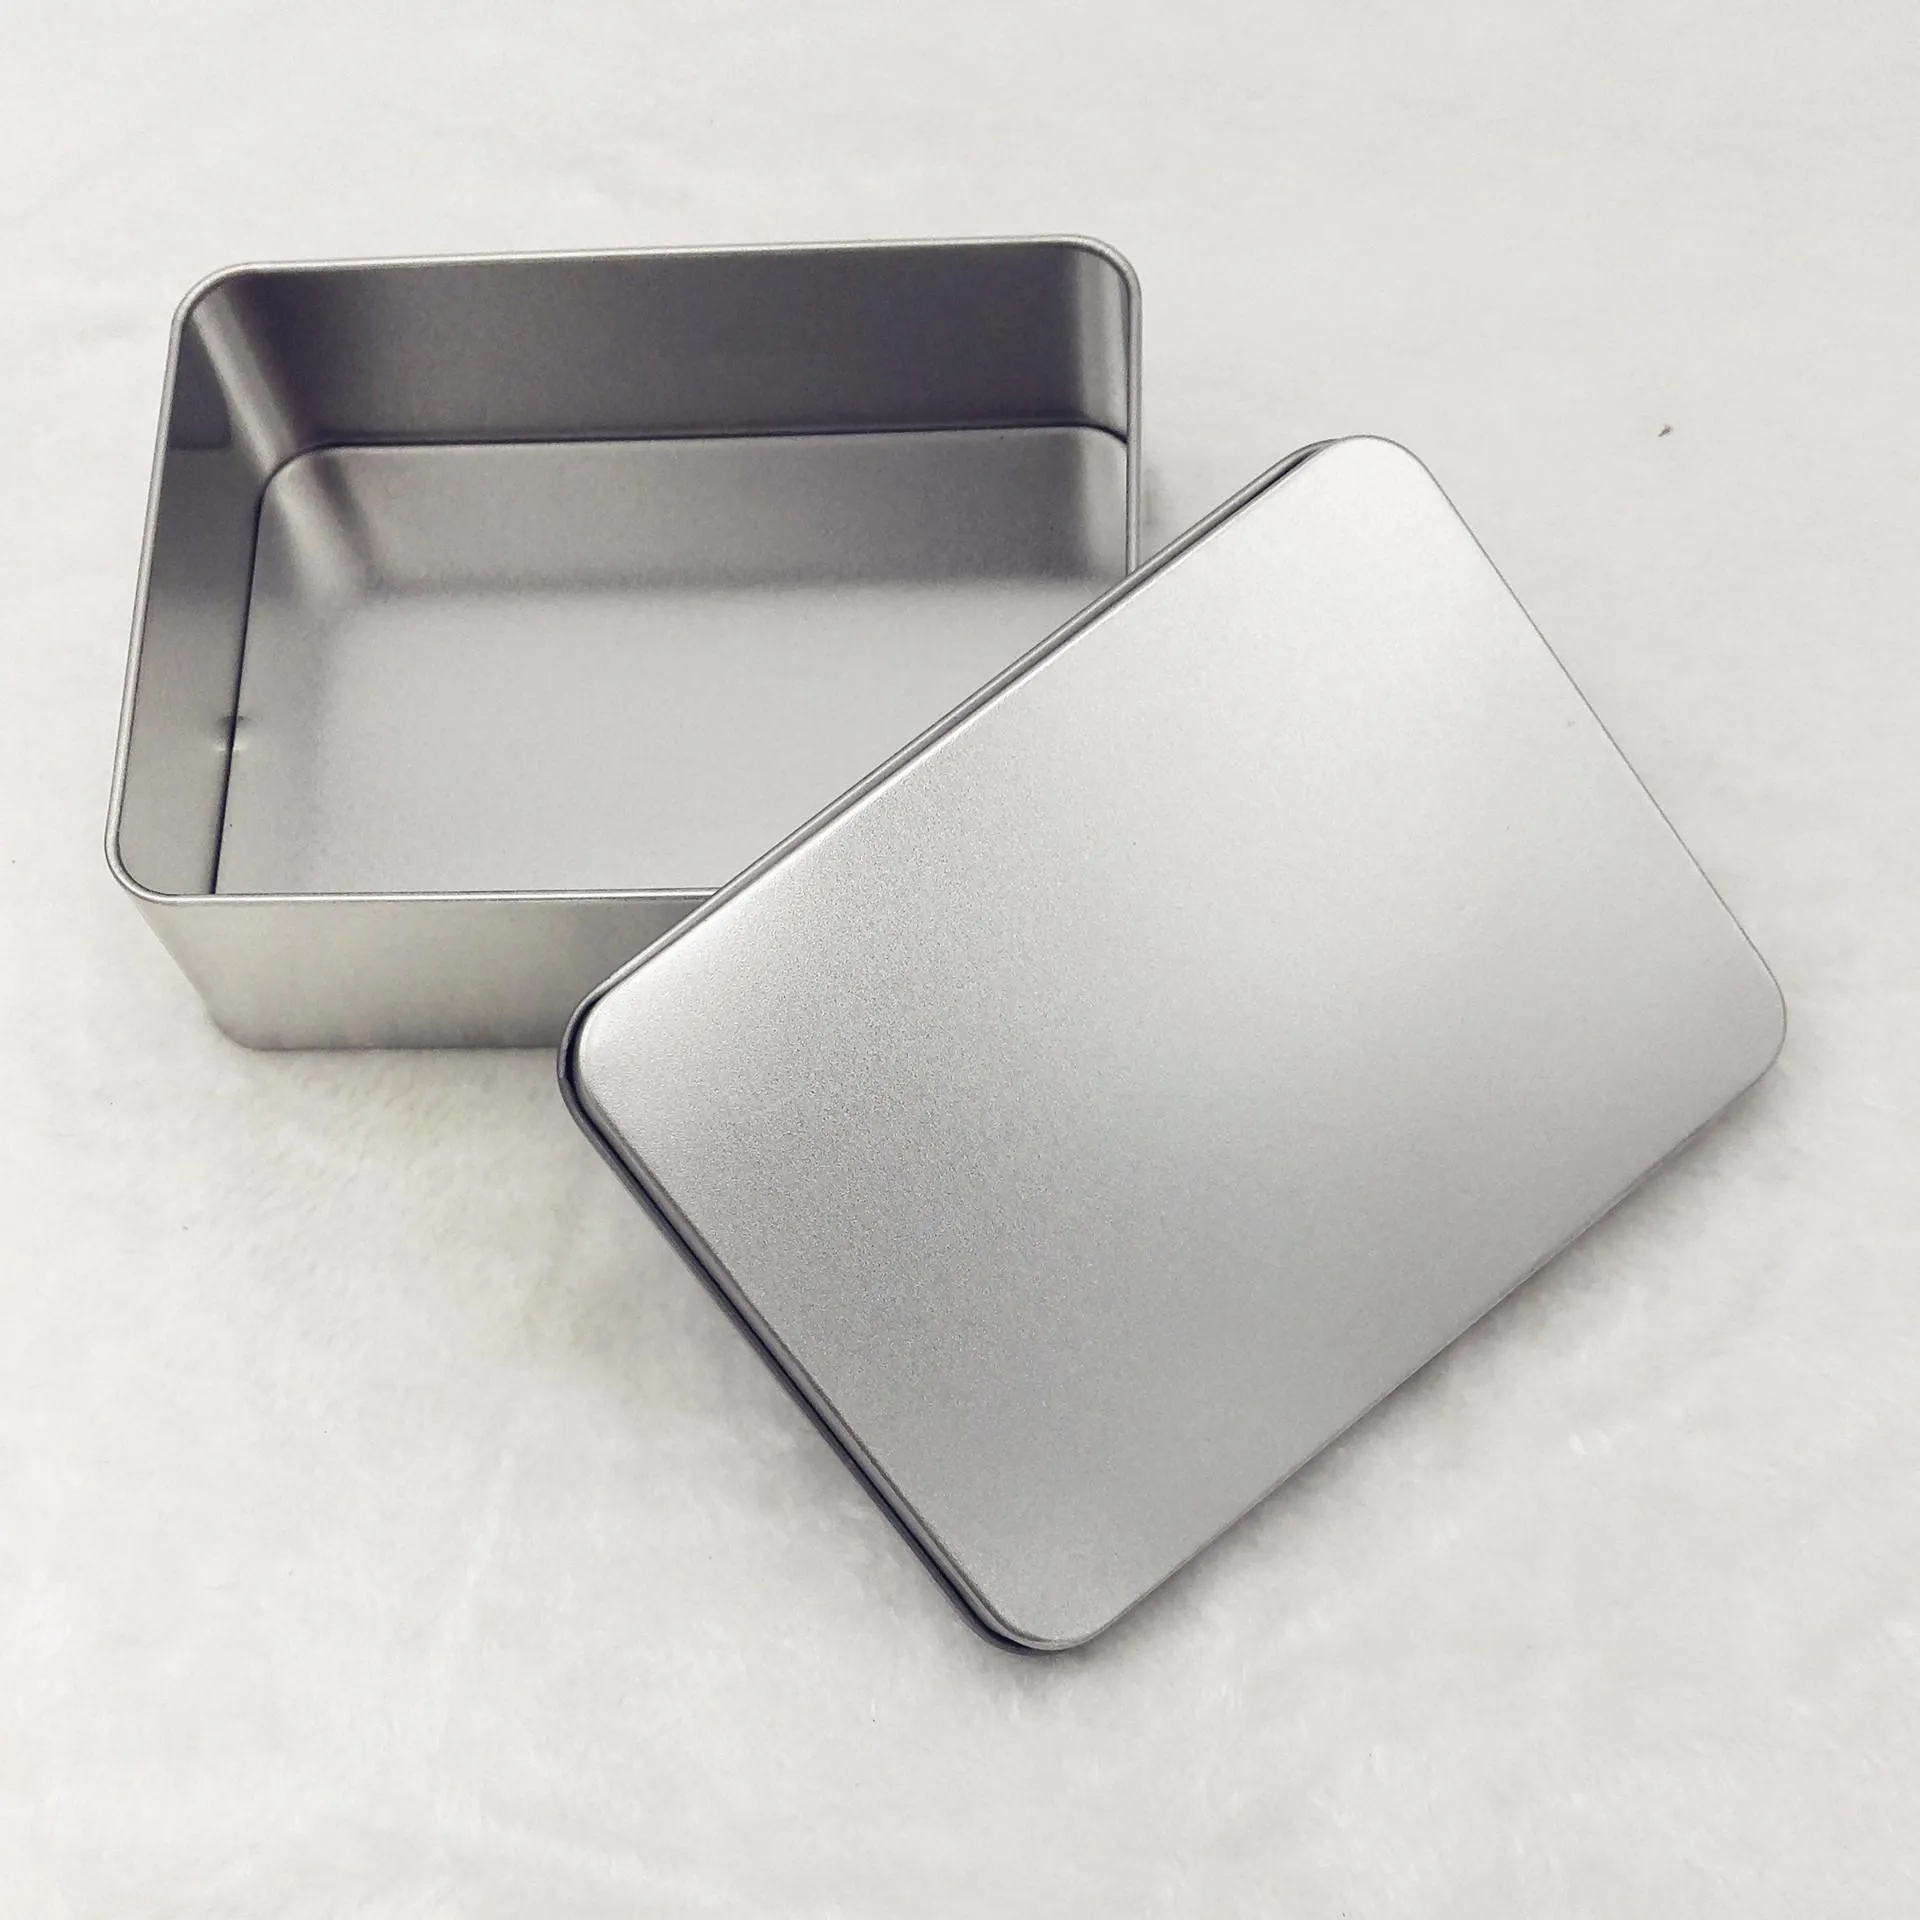 12cm *9cm *4cm Tin Case Storage Box Metal Rectangle Container for beads business card candy herbs DH9811